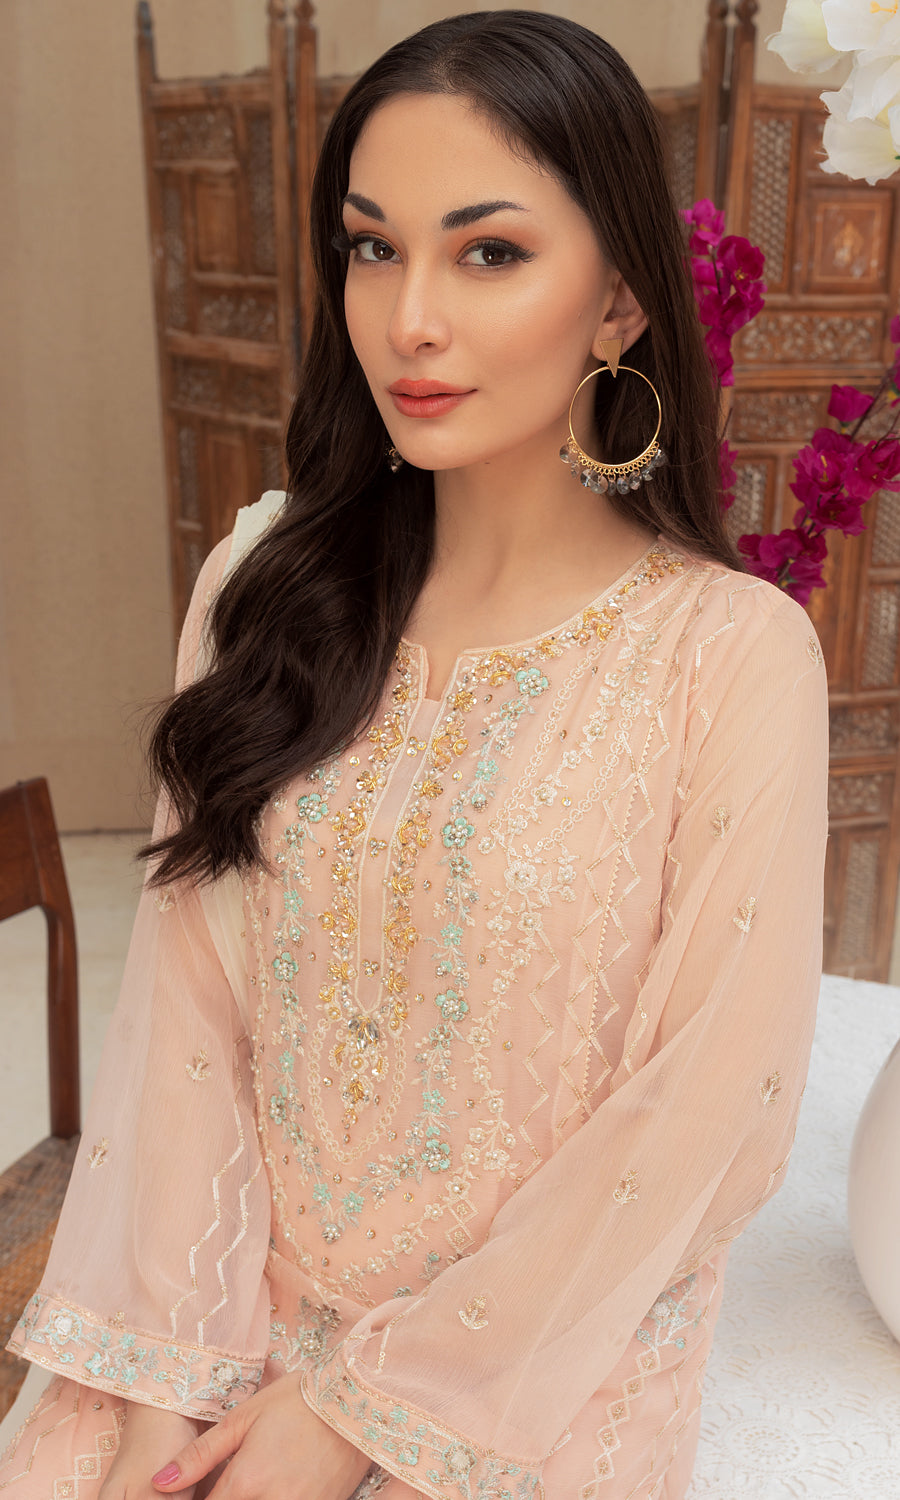 Shamooz. Mushq Volume 3. This elegance masterpiece style with pastel color and embrodiery work on the front and side panel that enhances a glow of color.The elegant hand-embellished add-on sparkle of glamour.This ensemble is a perfect balance for occassion.